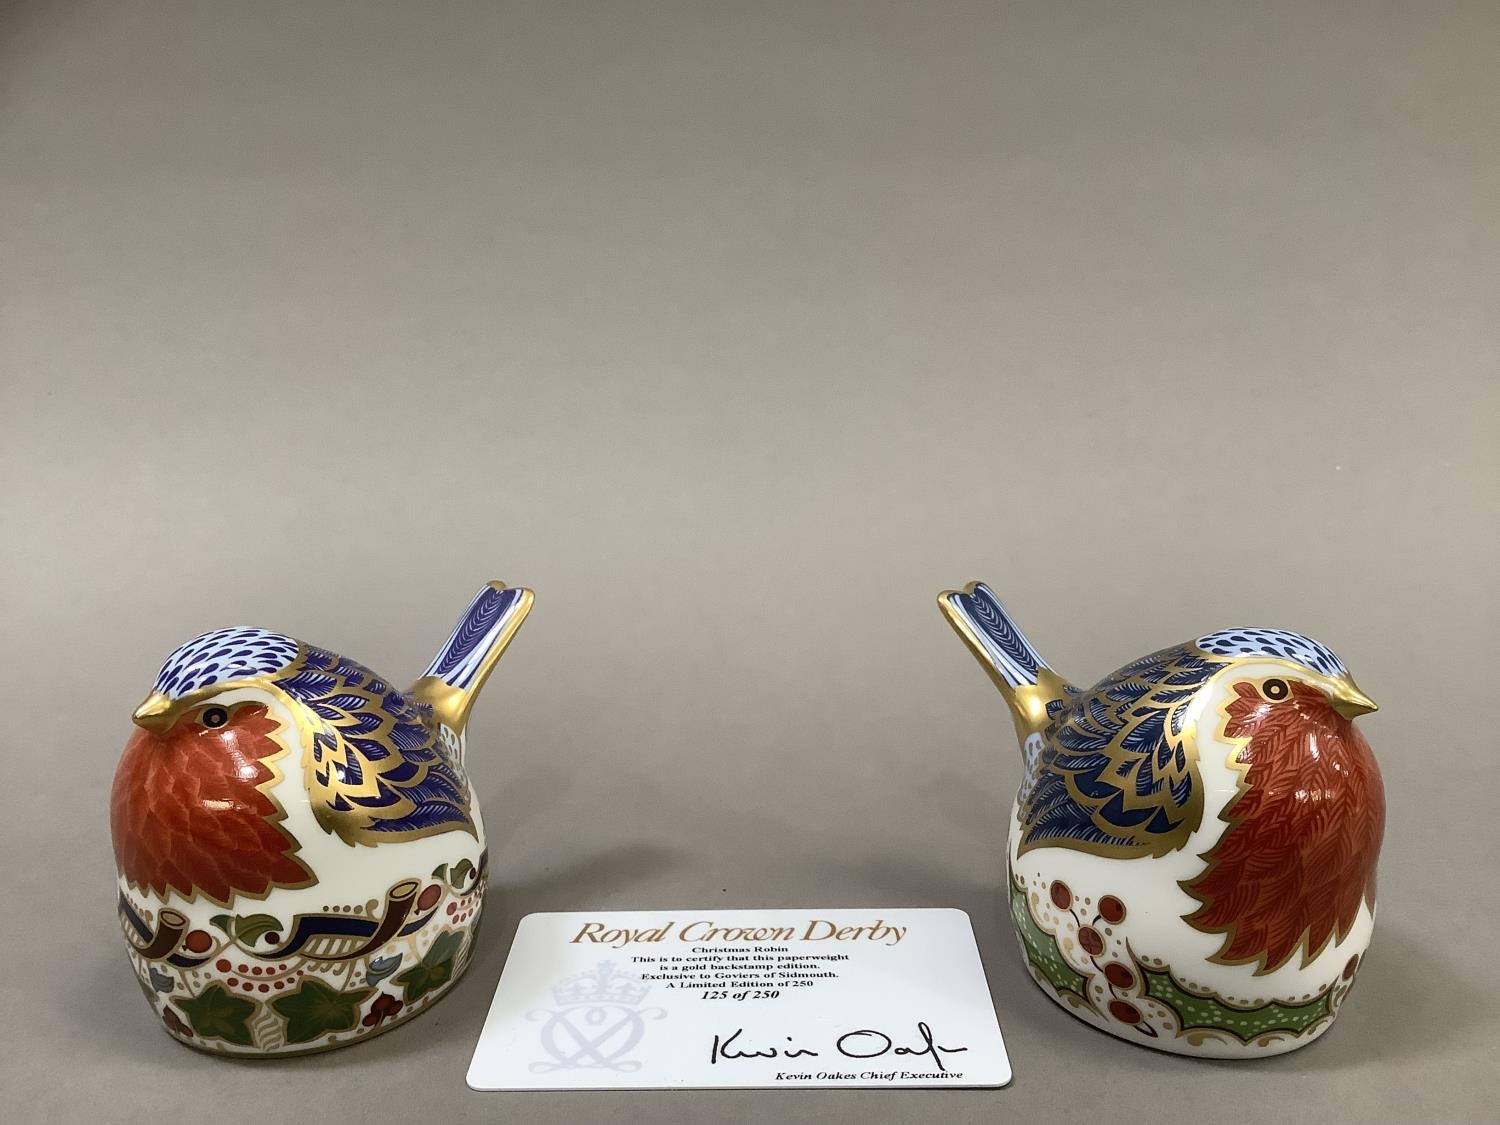 Two Royal Crown Derby Christmas robins, one a pre-release edition of 250 exclusive to Goviers of